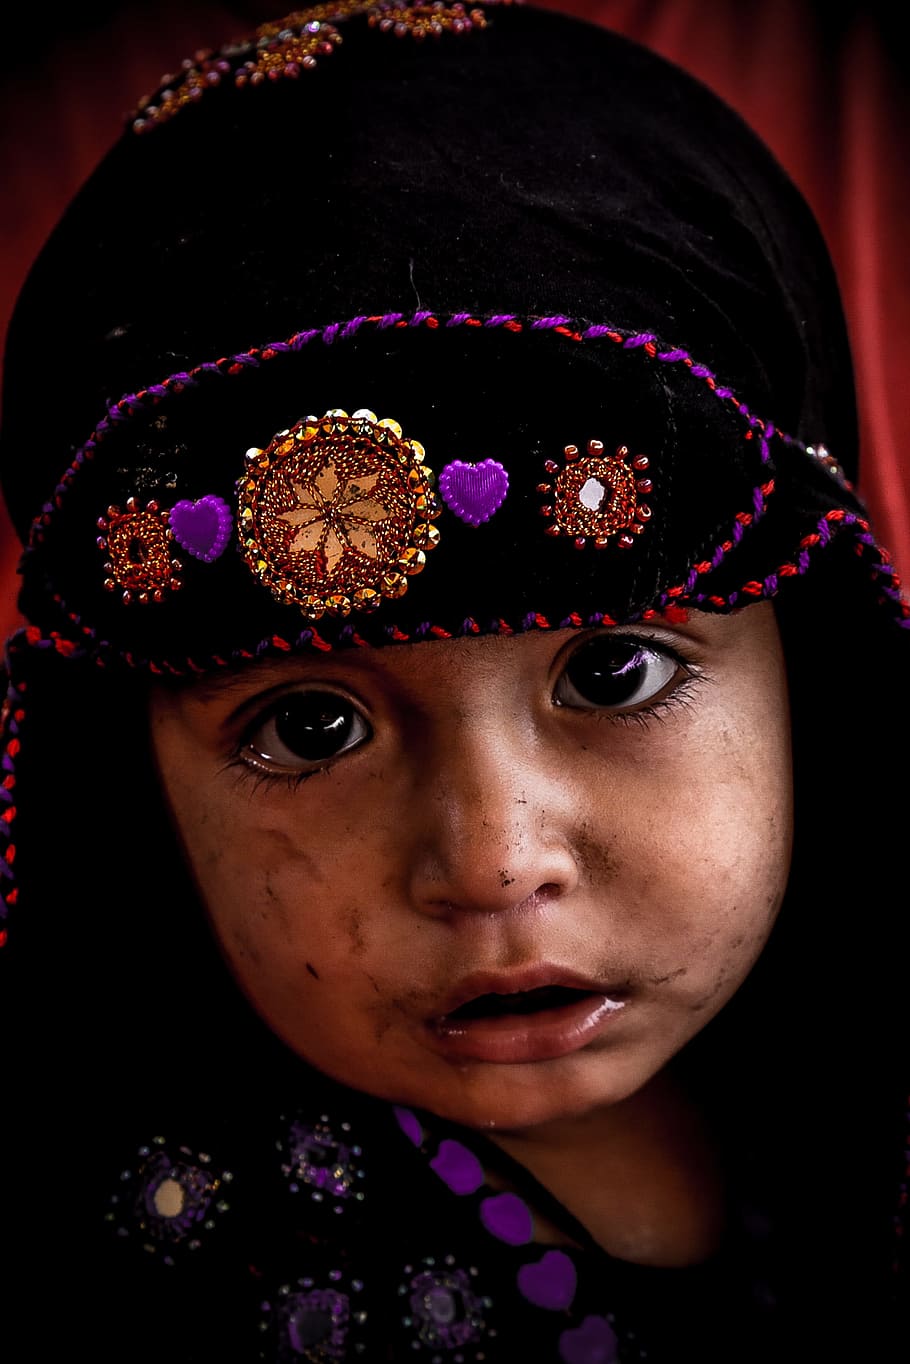 child, afghan, refugee, kid, baby, face, happiness, cute, people